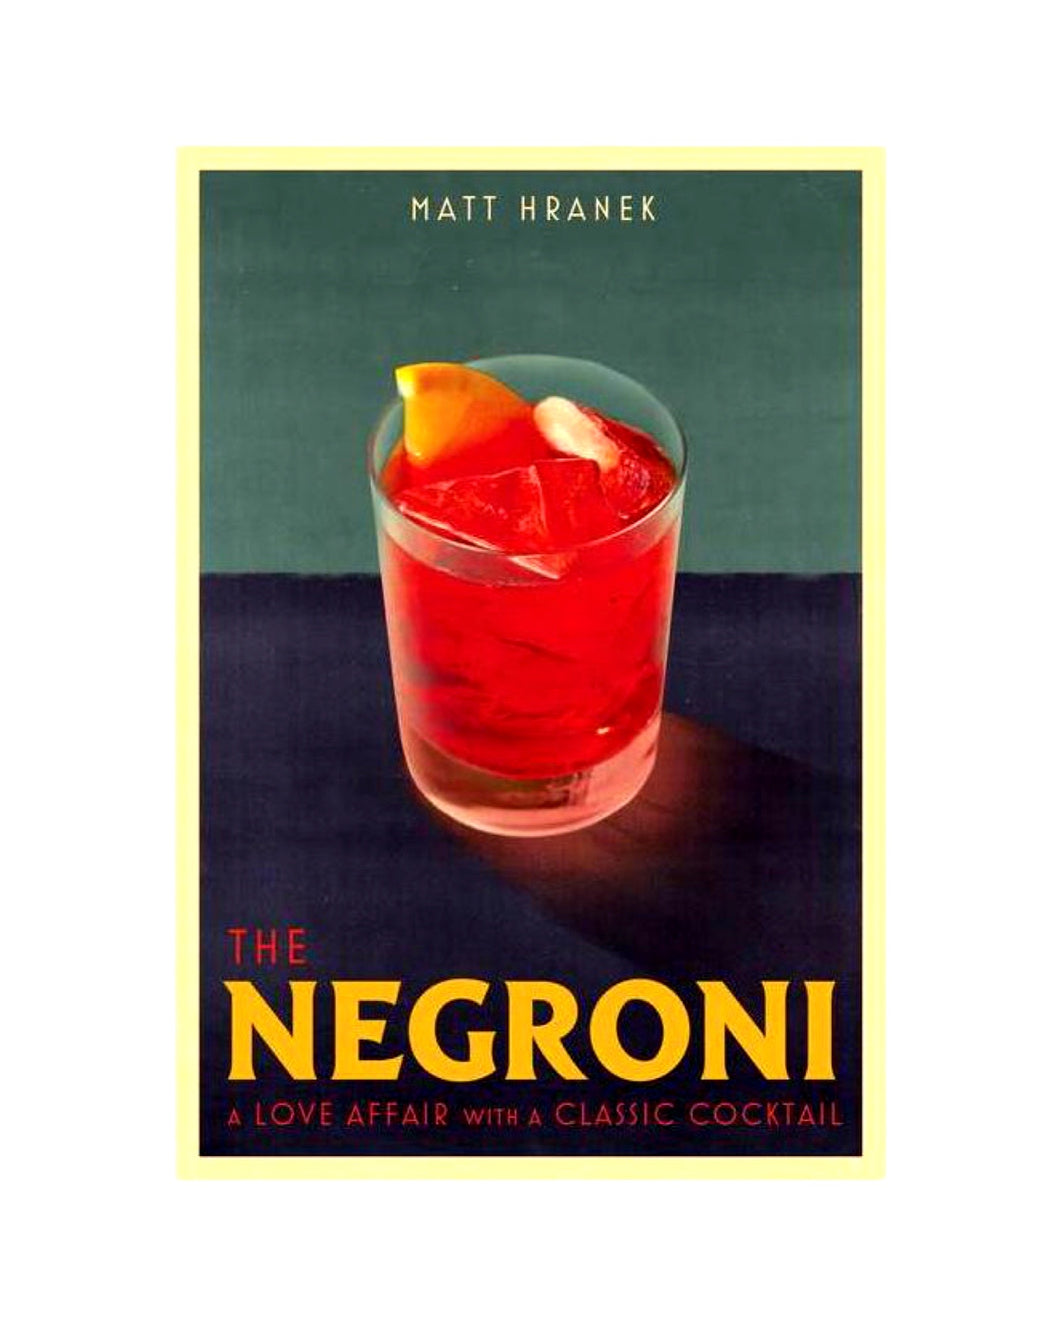 The Negroni: A Love Affair With a Classic Cocktail